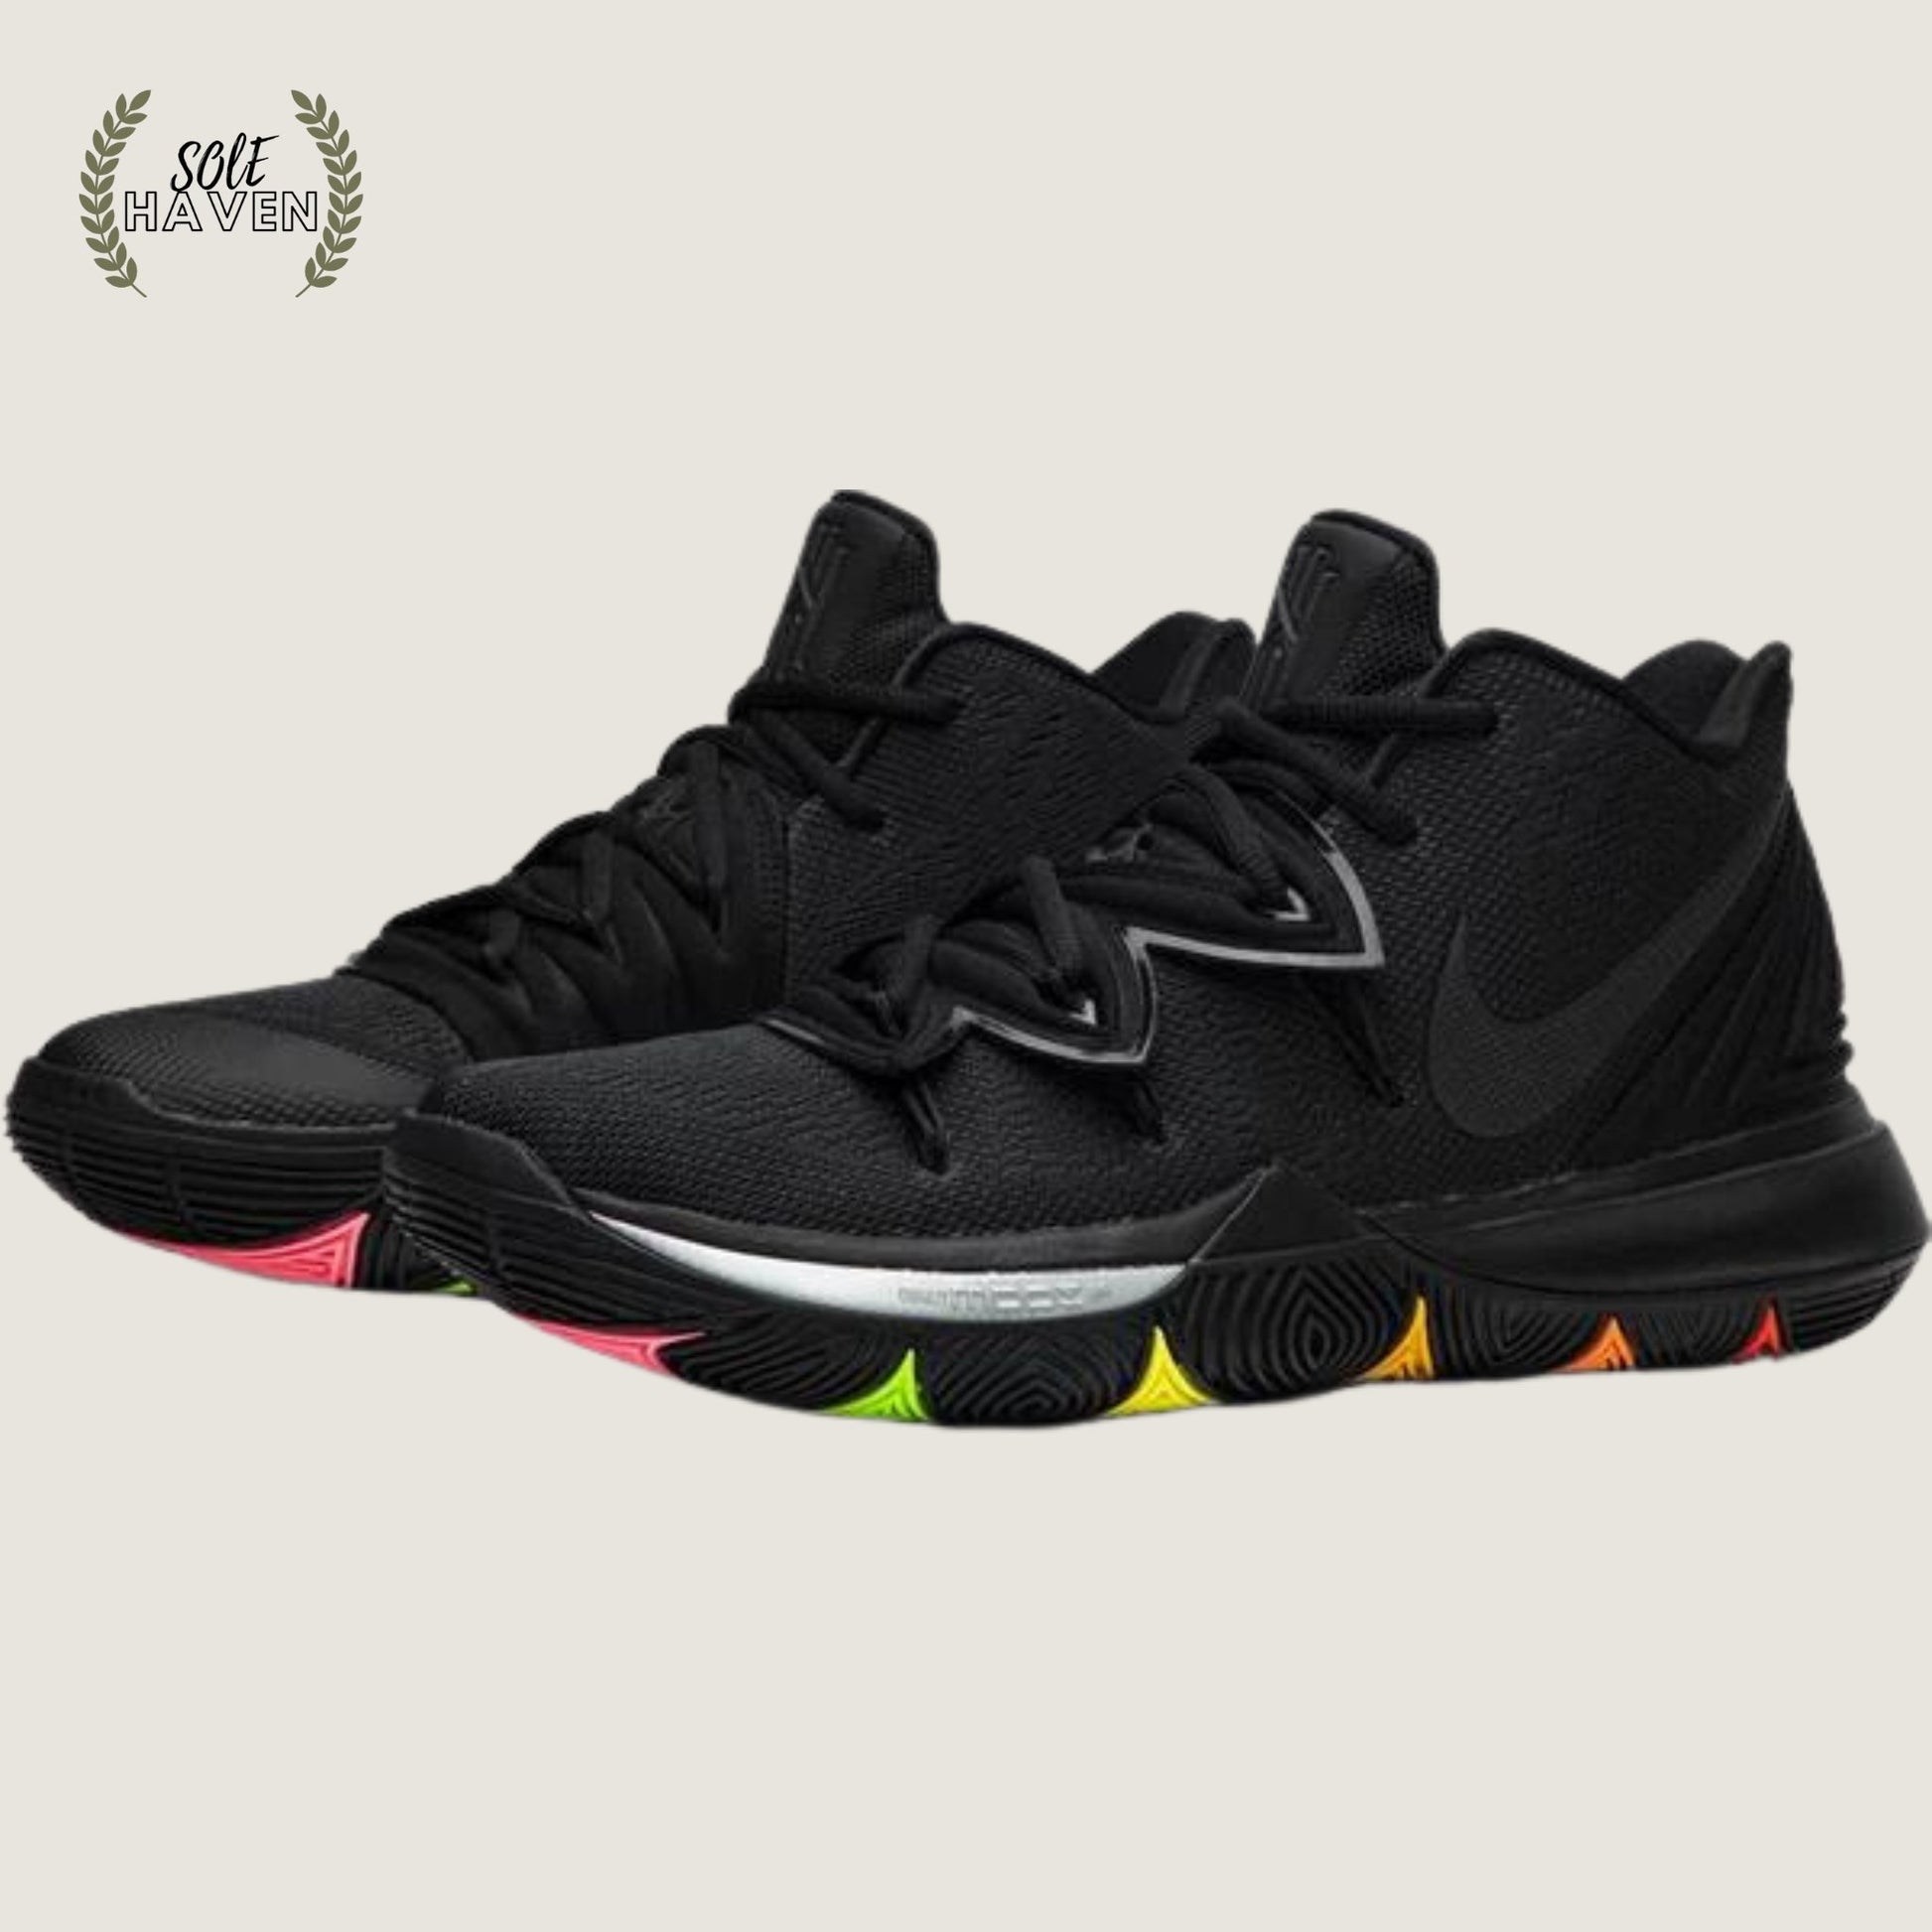 Kyrie 5 'Neon Sole' - Sole HavenShoesNike